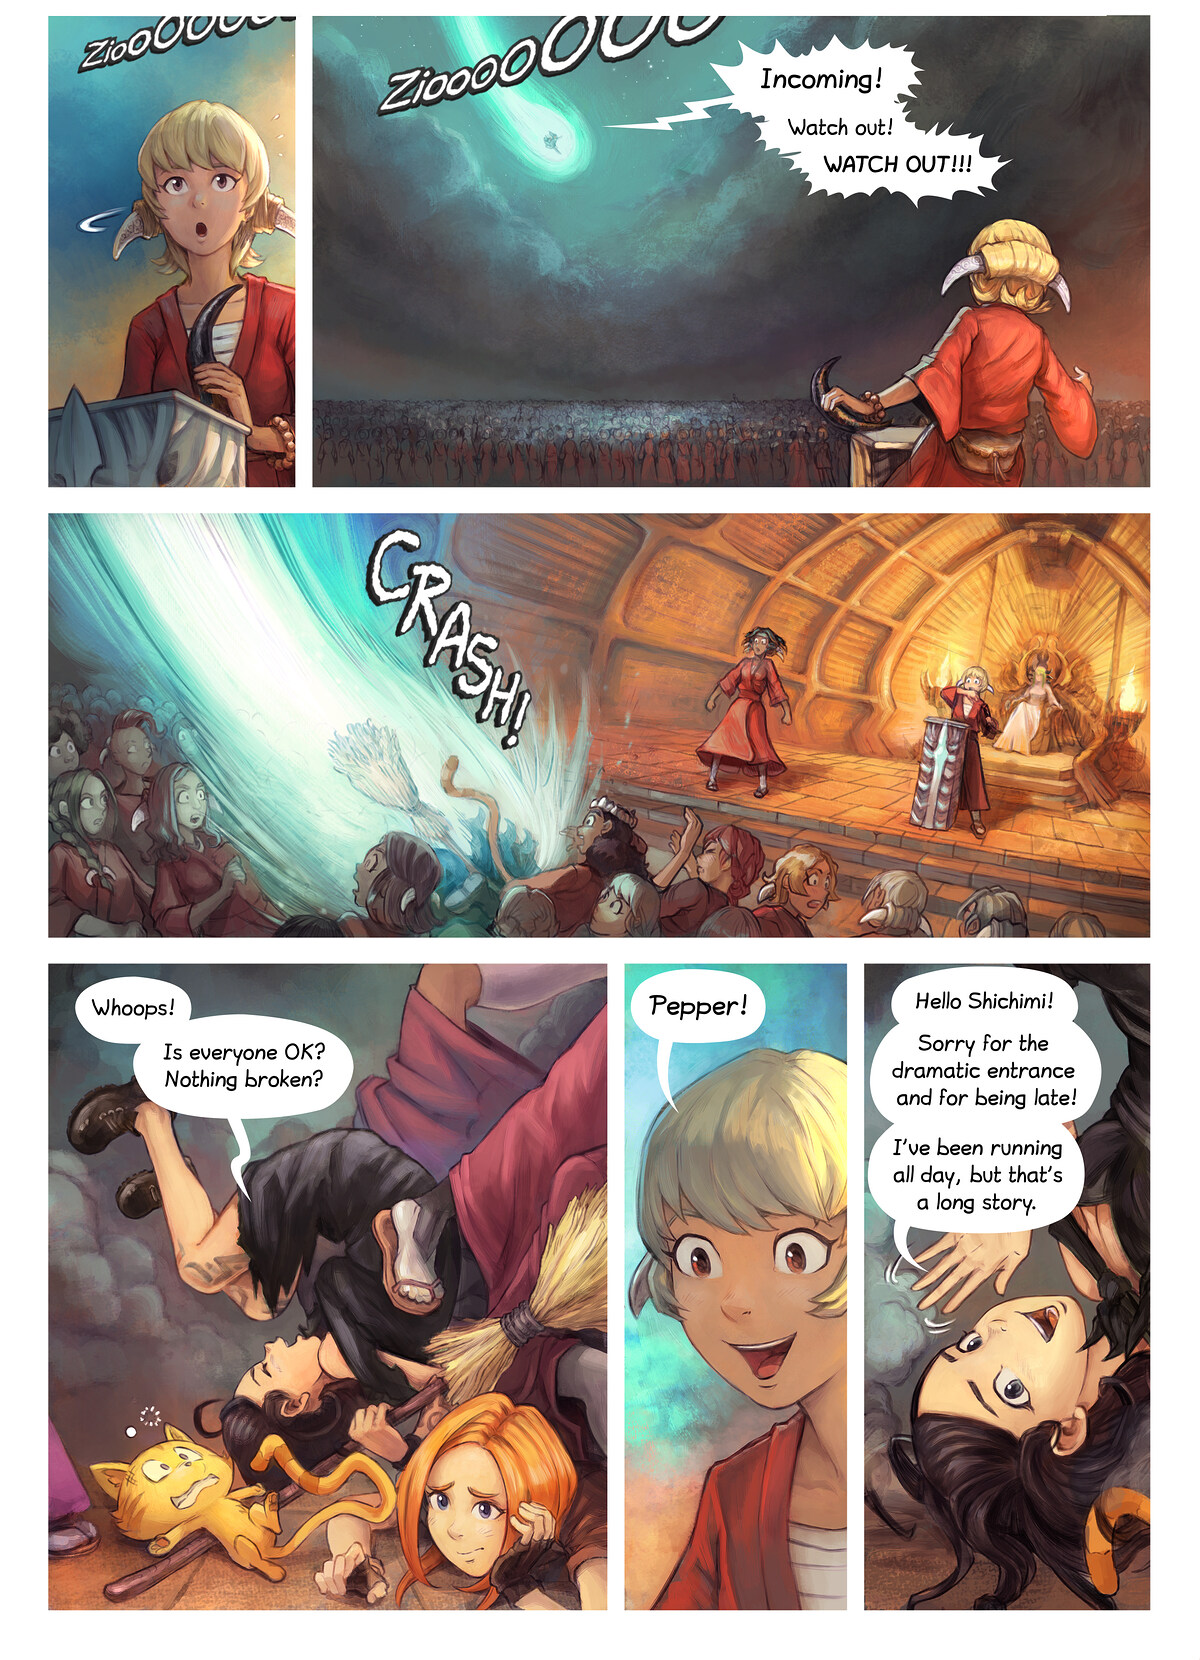 Episode 34: The Knighting of Shichimi, Page 2